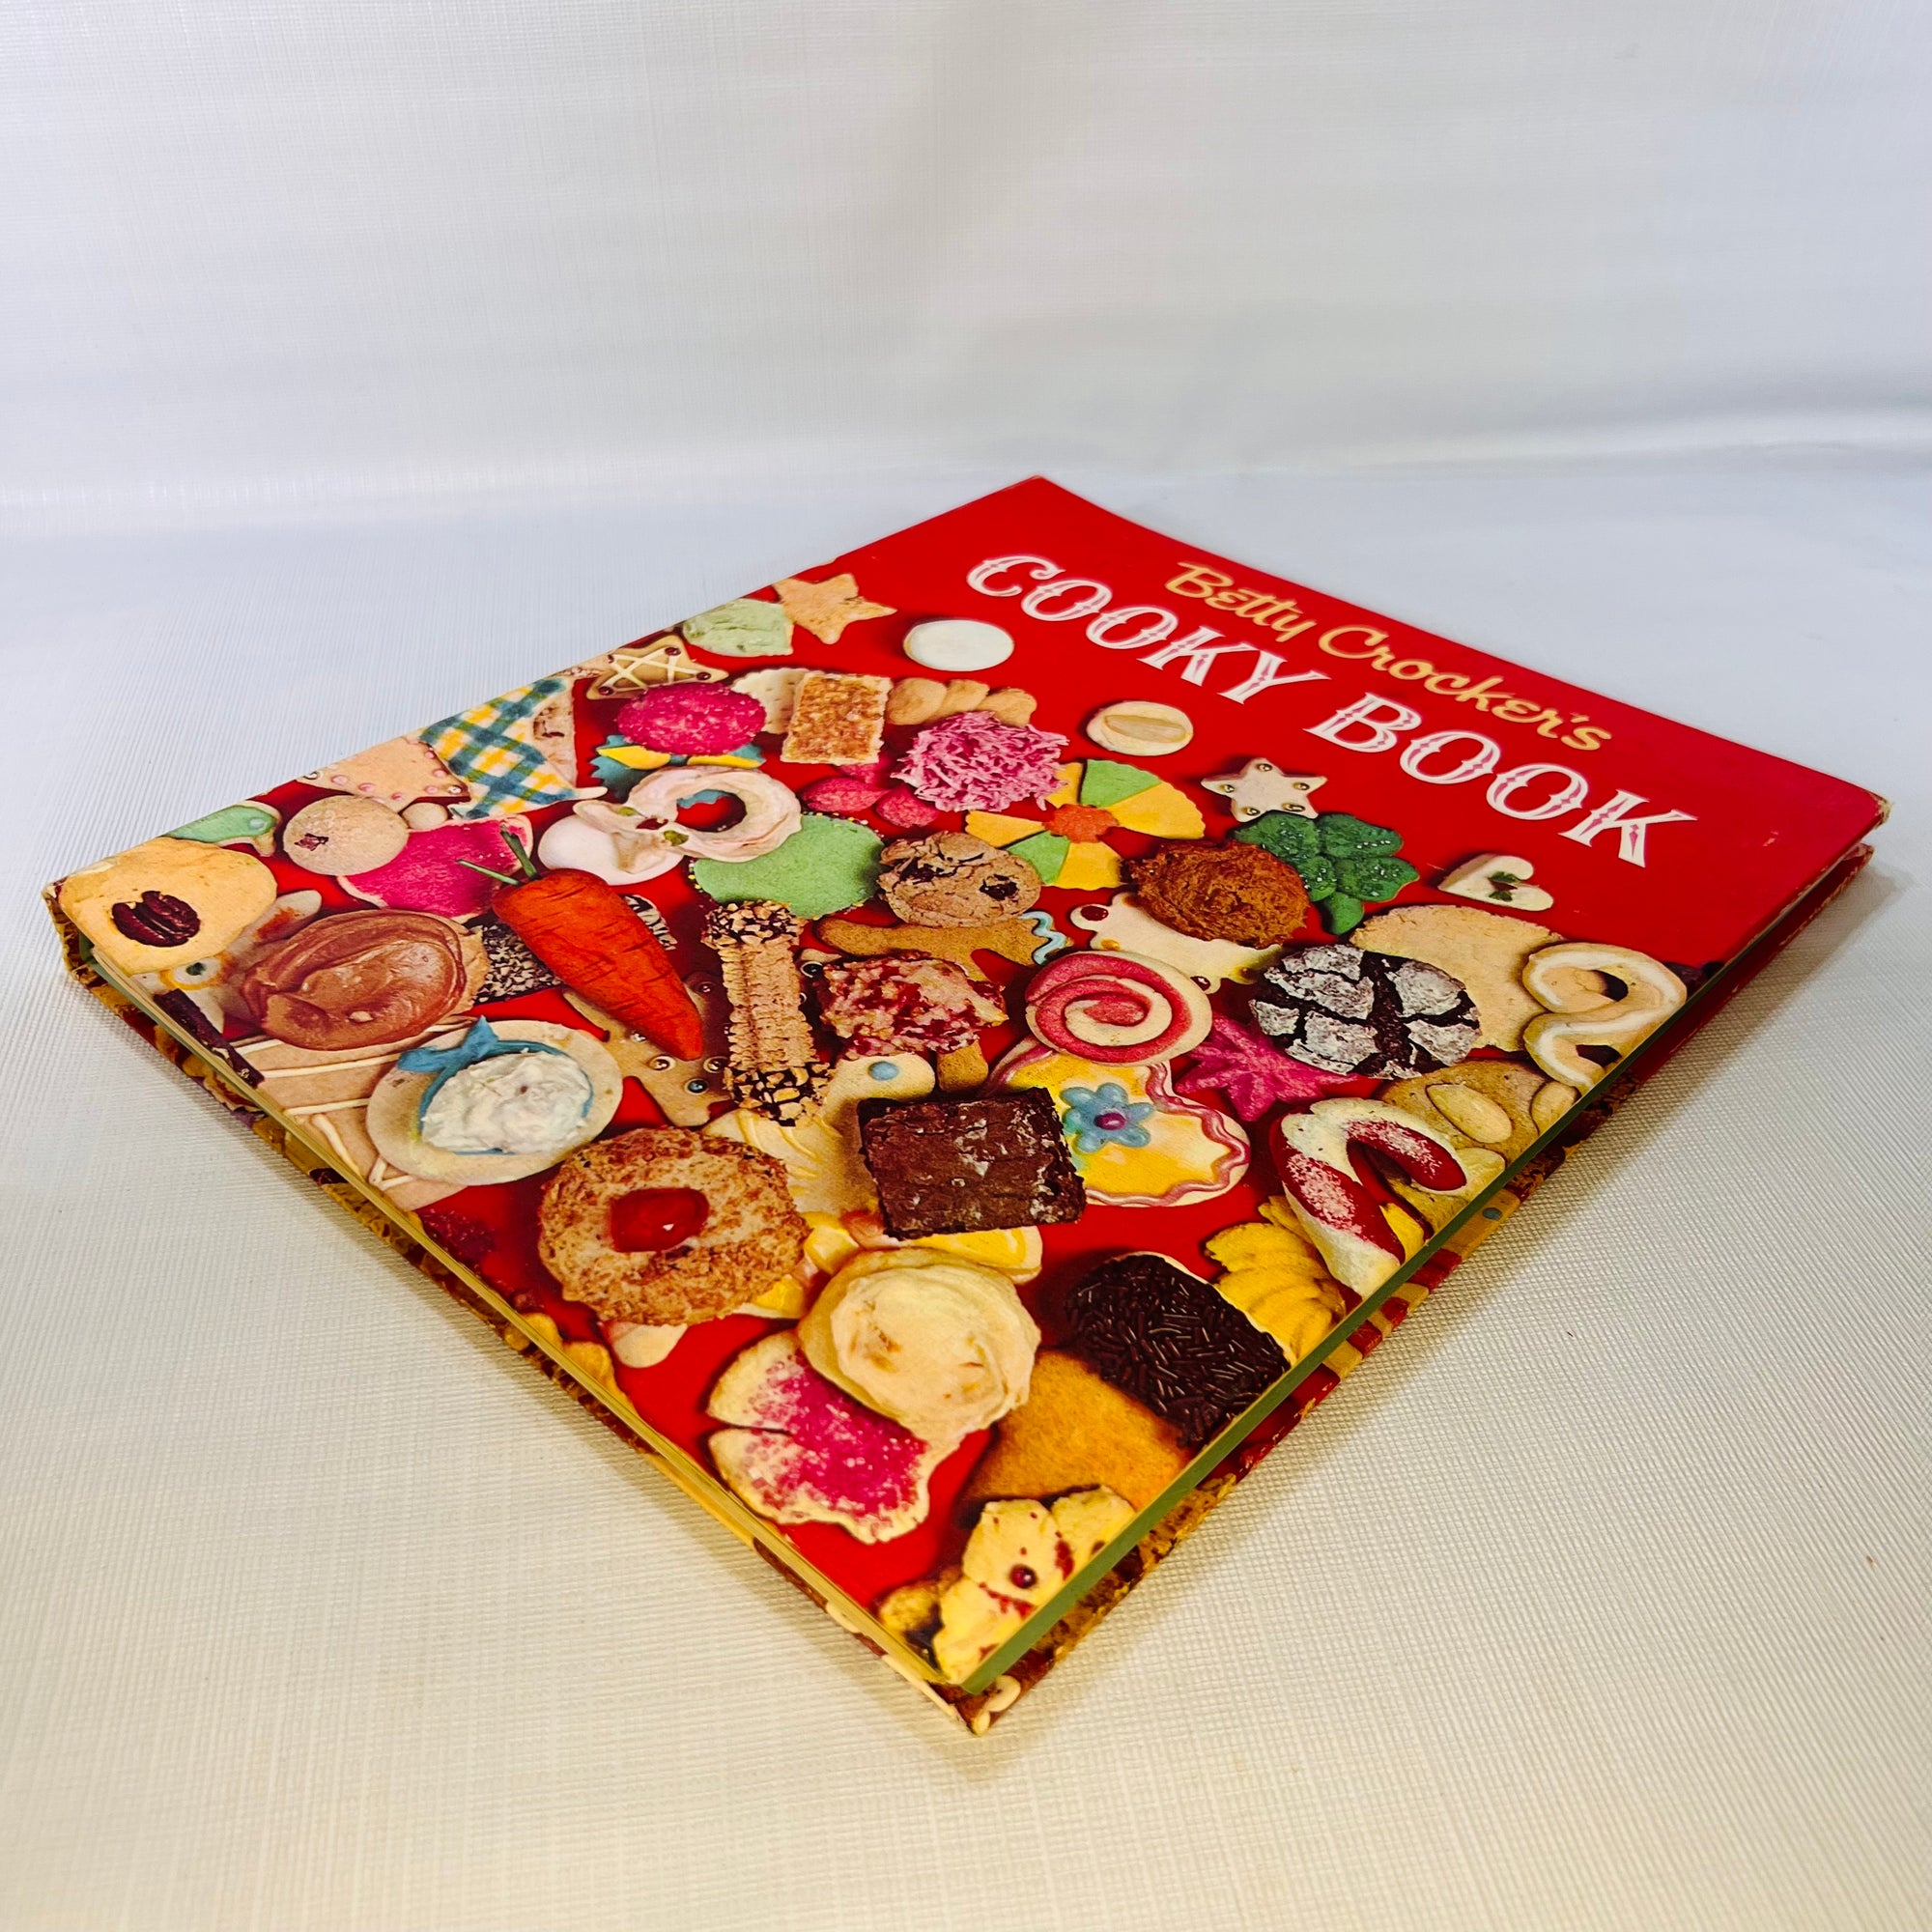 Betty Crocker's Cooky Book illustrations by Eric Mulvany 1963 General Mills Inc